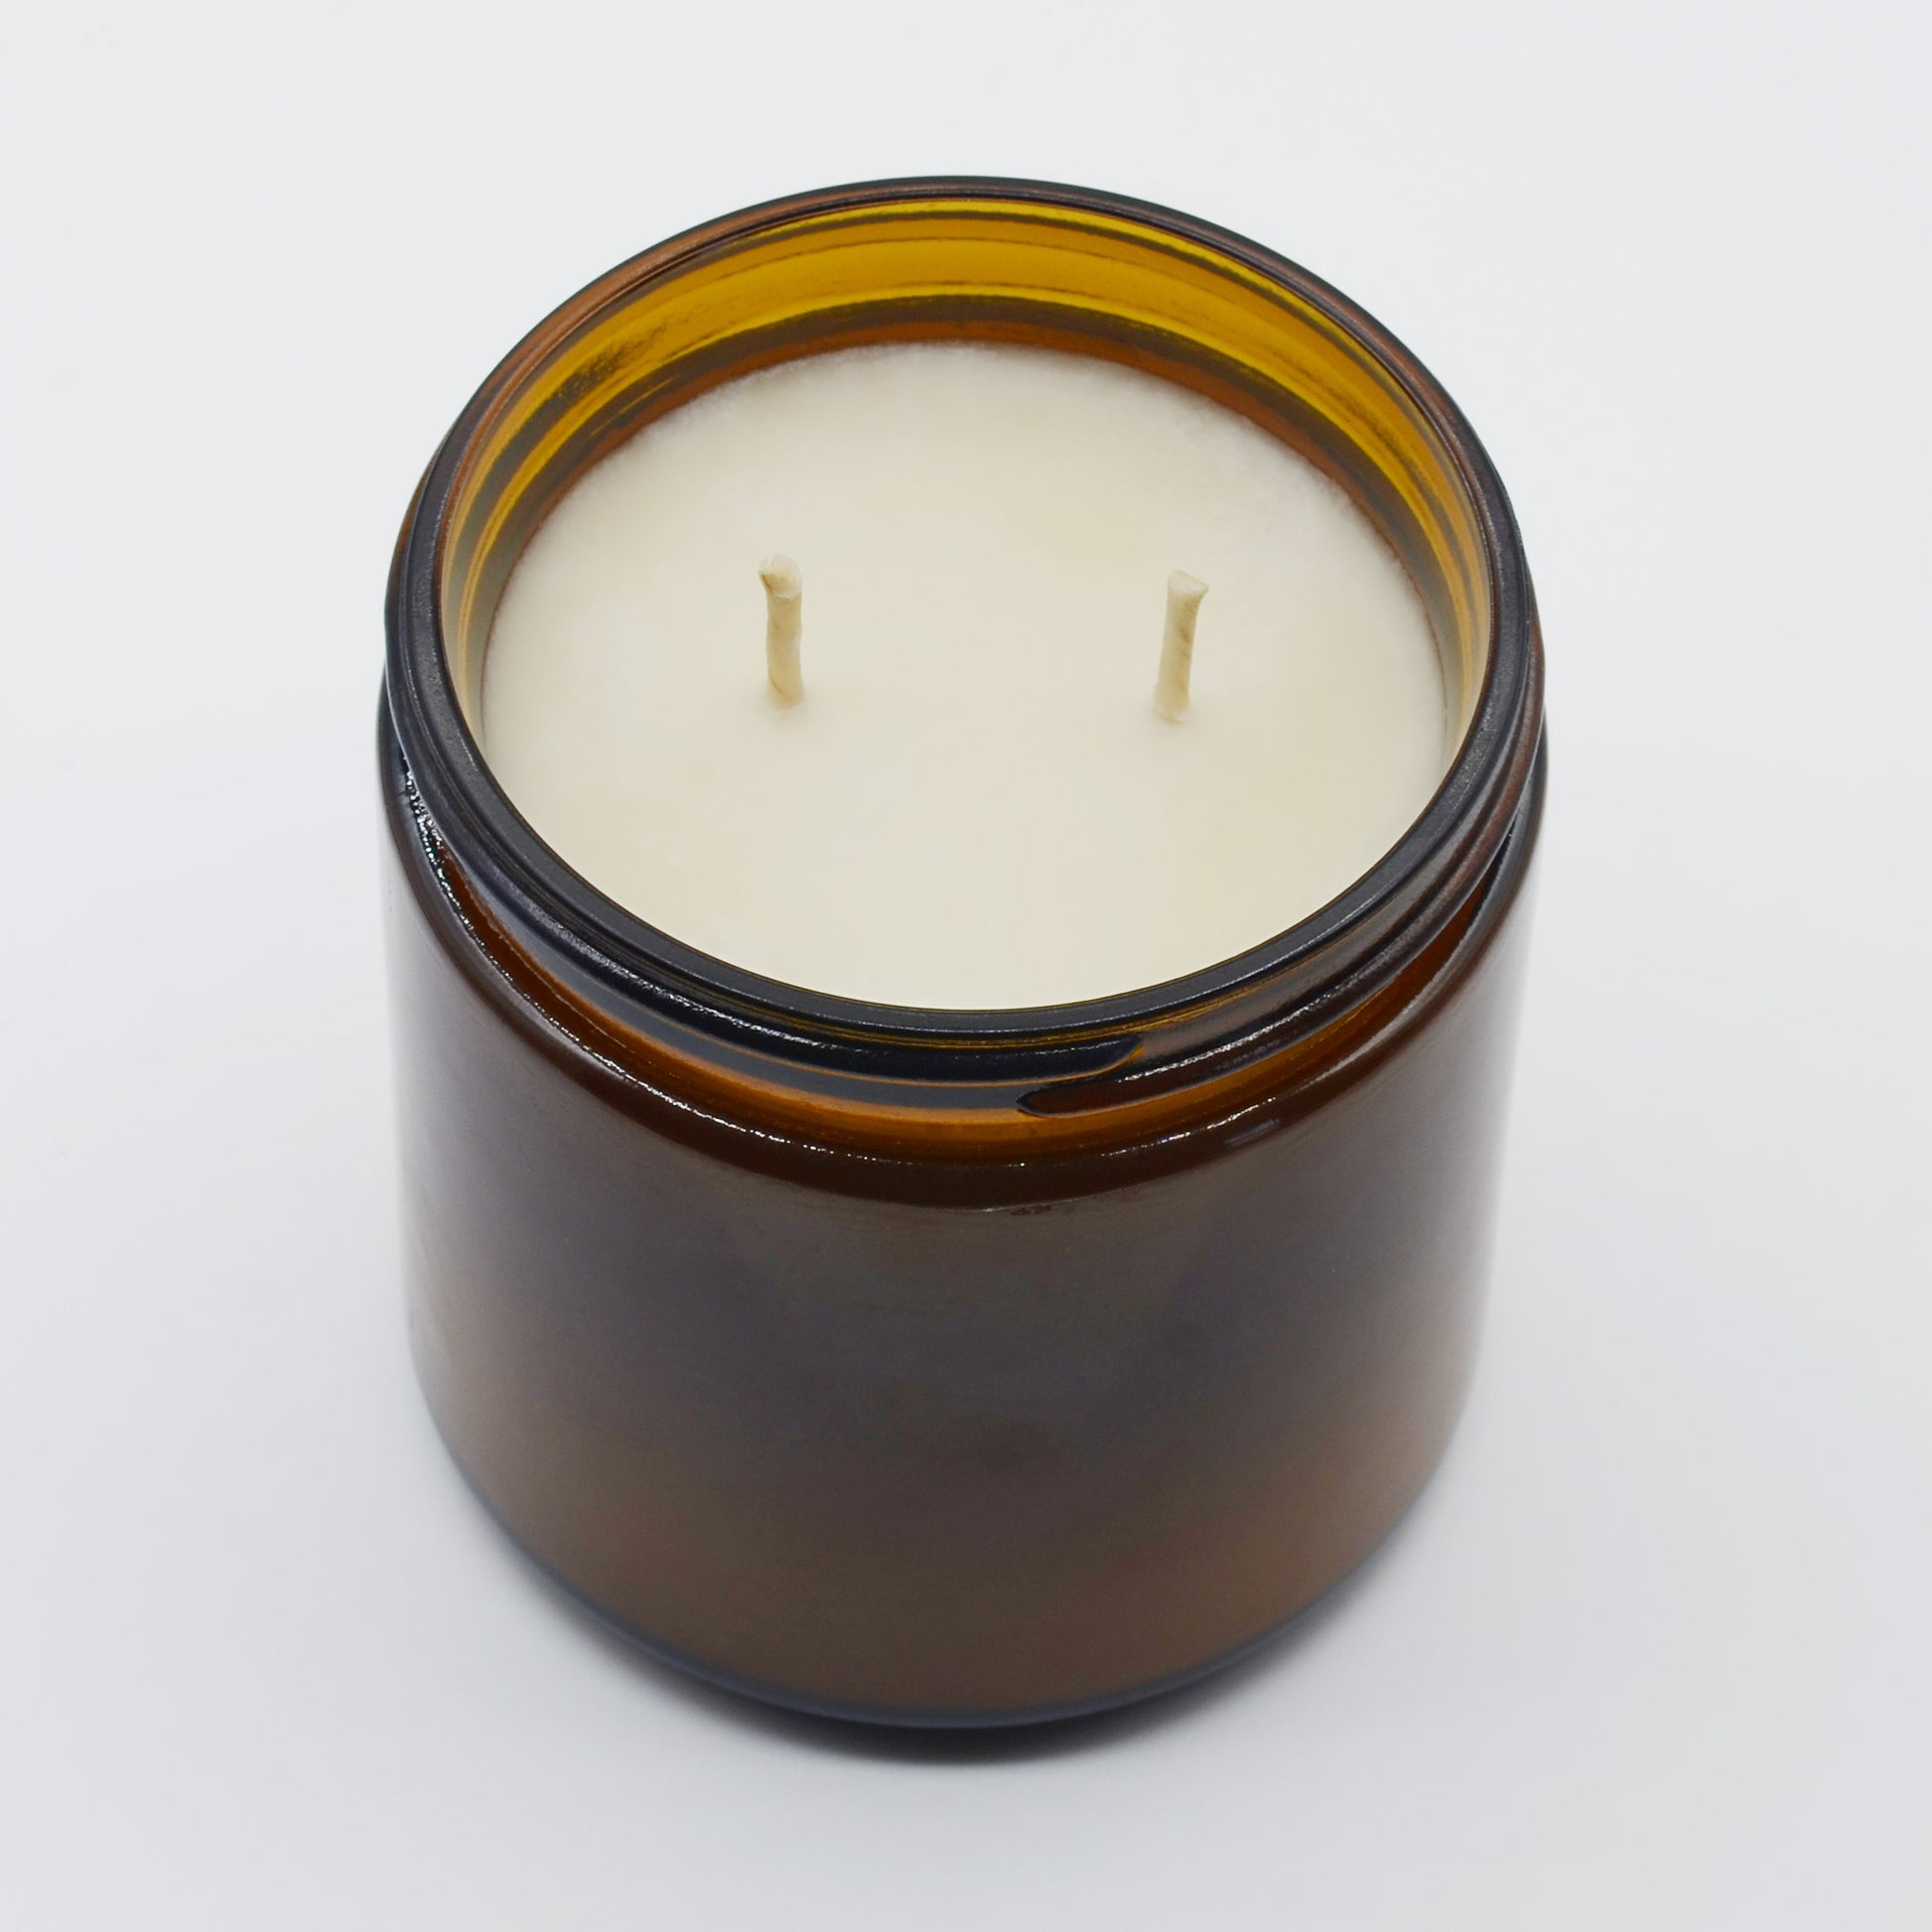 16 ounce Nag Champa Soy Candle